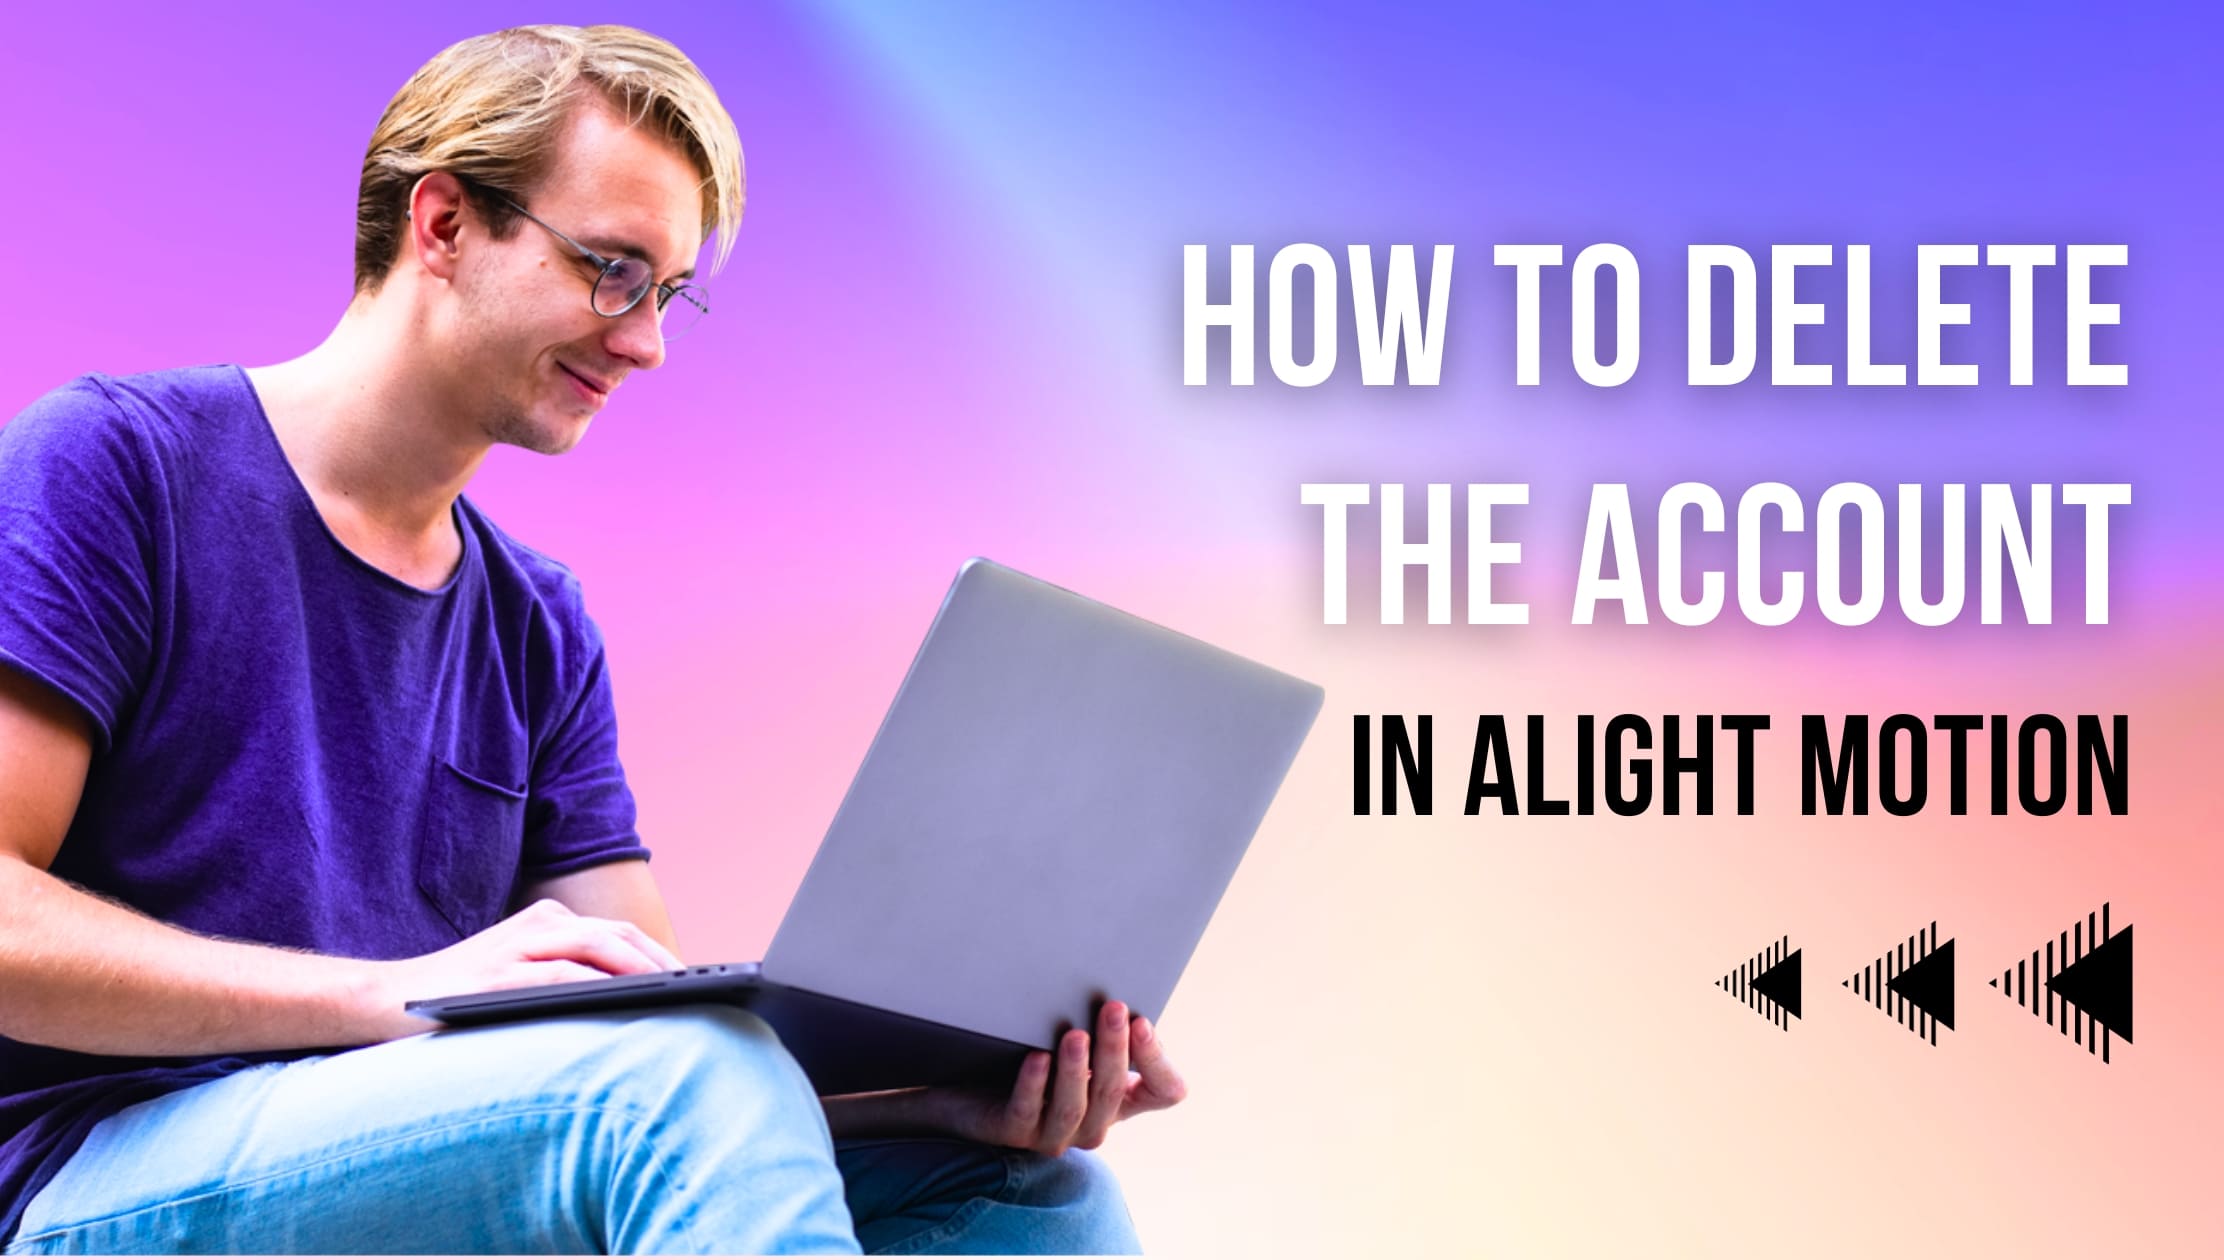 How to delete the account in Alight motion?